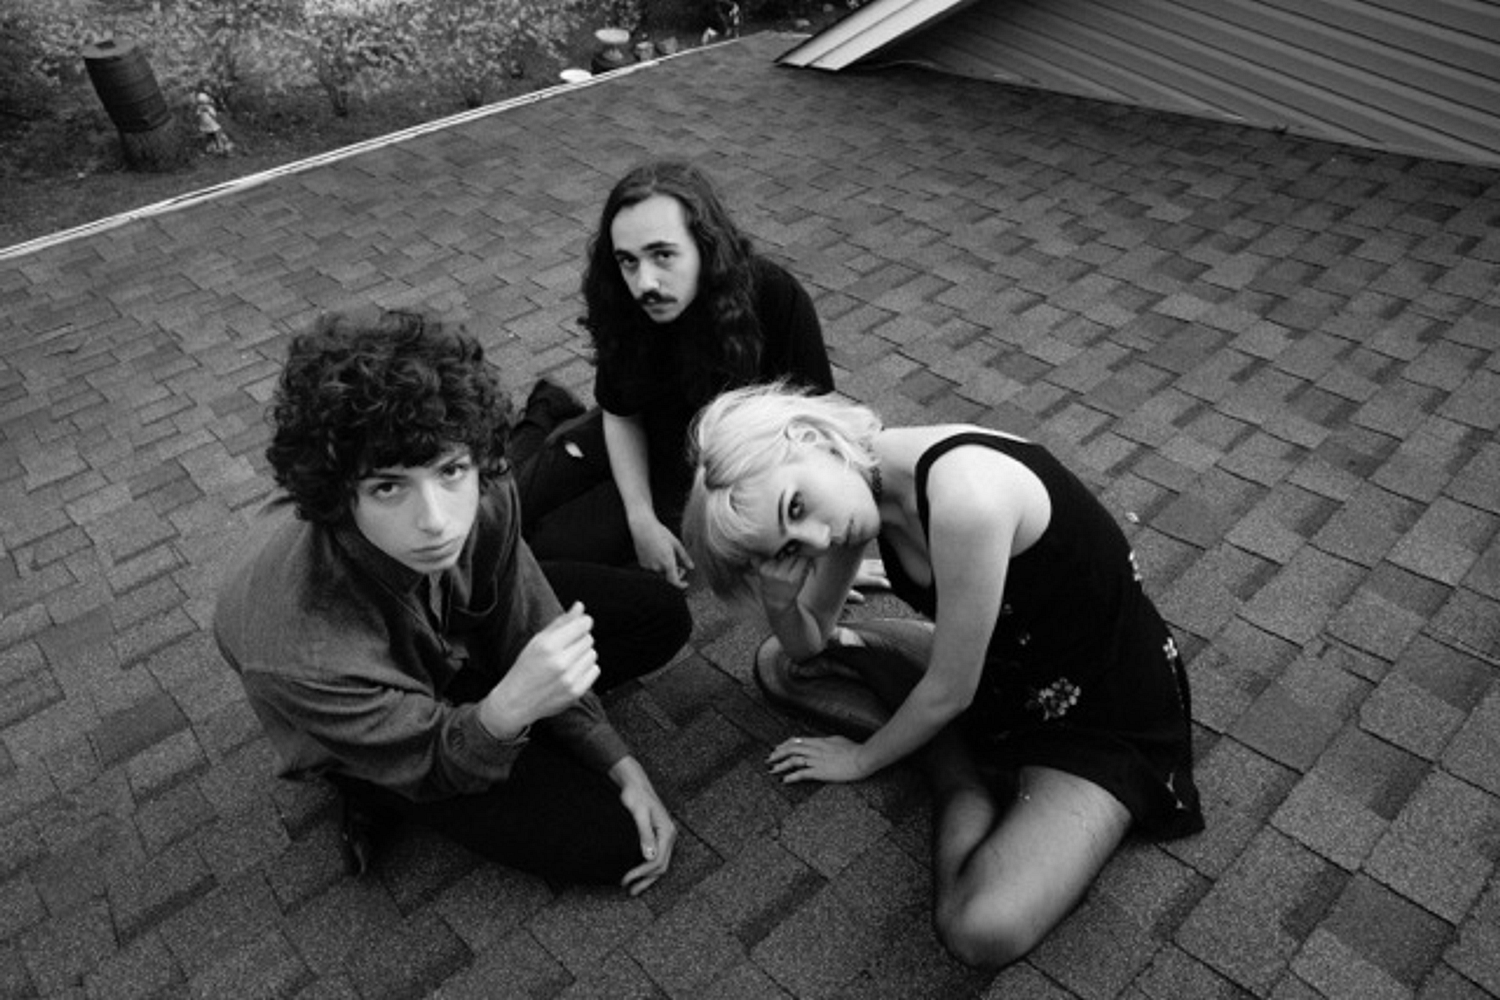 Sunflower Bean say their new album is to be recorded “in the winter”